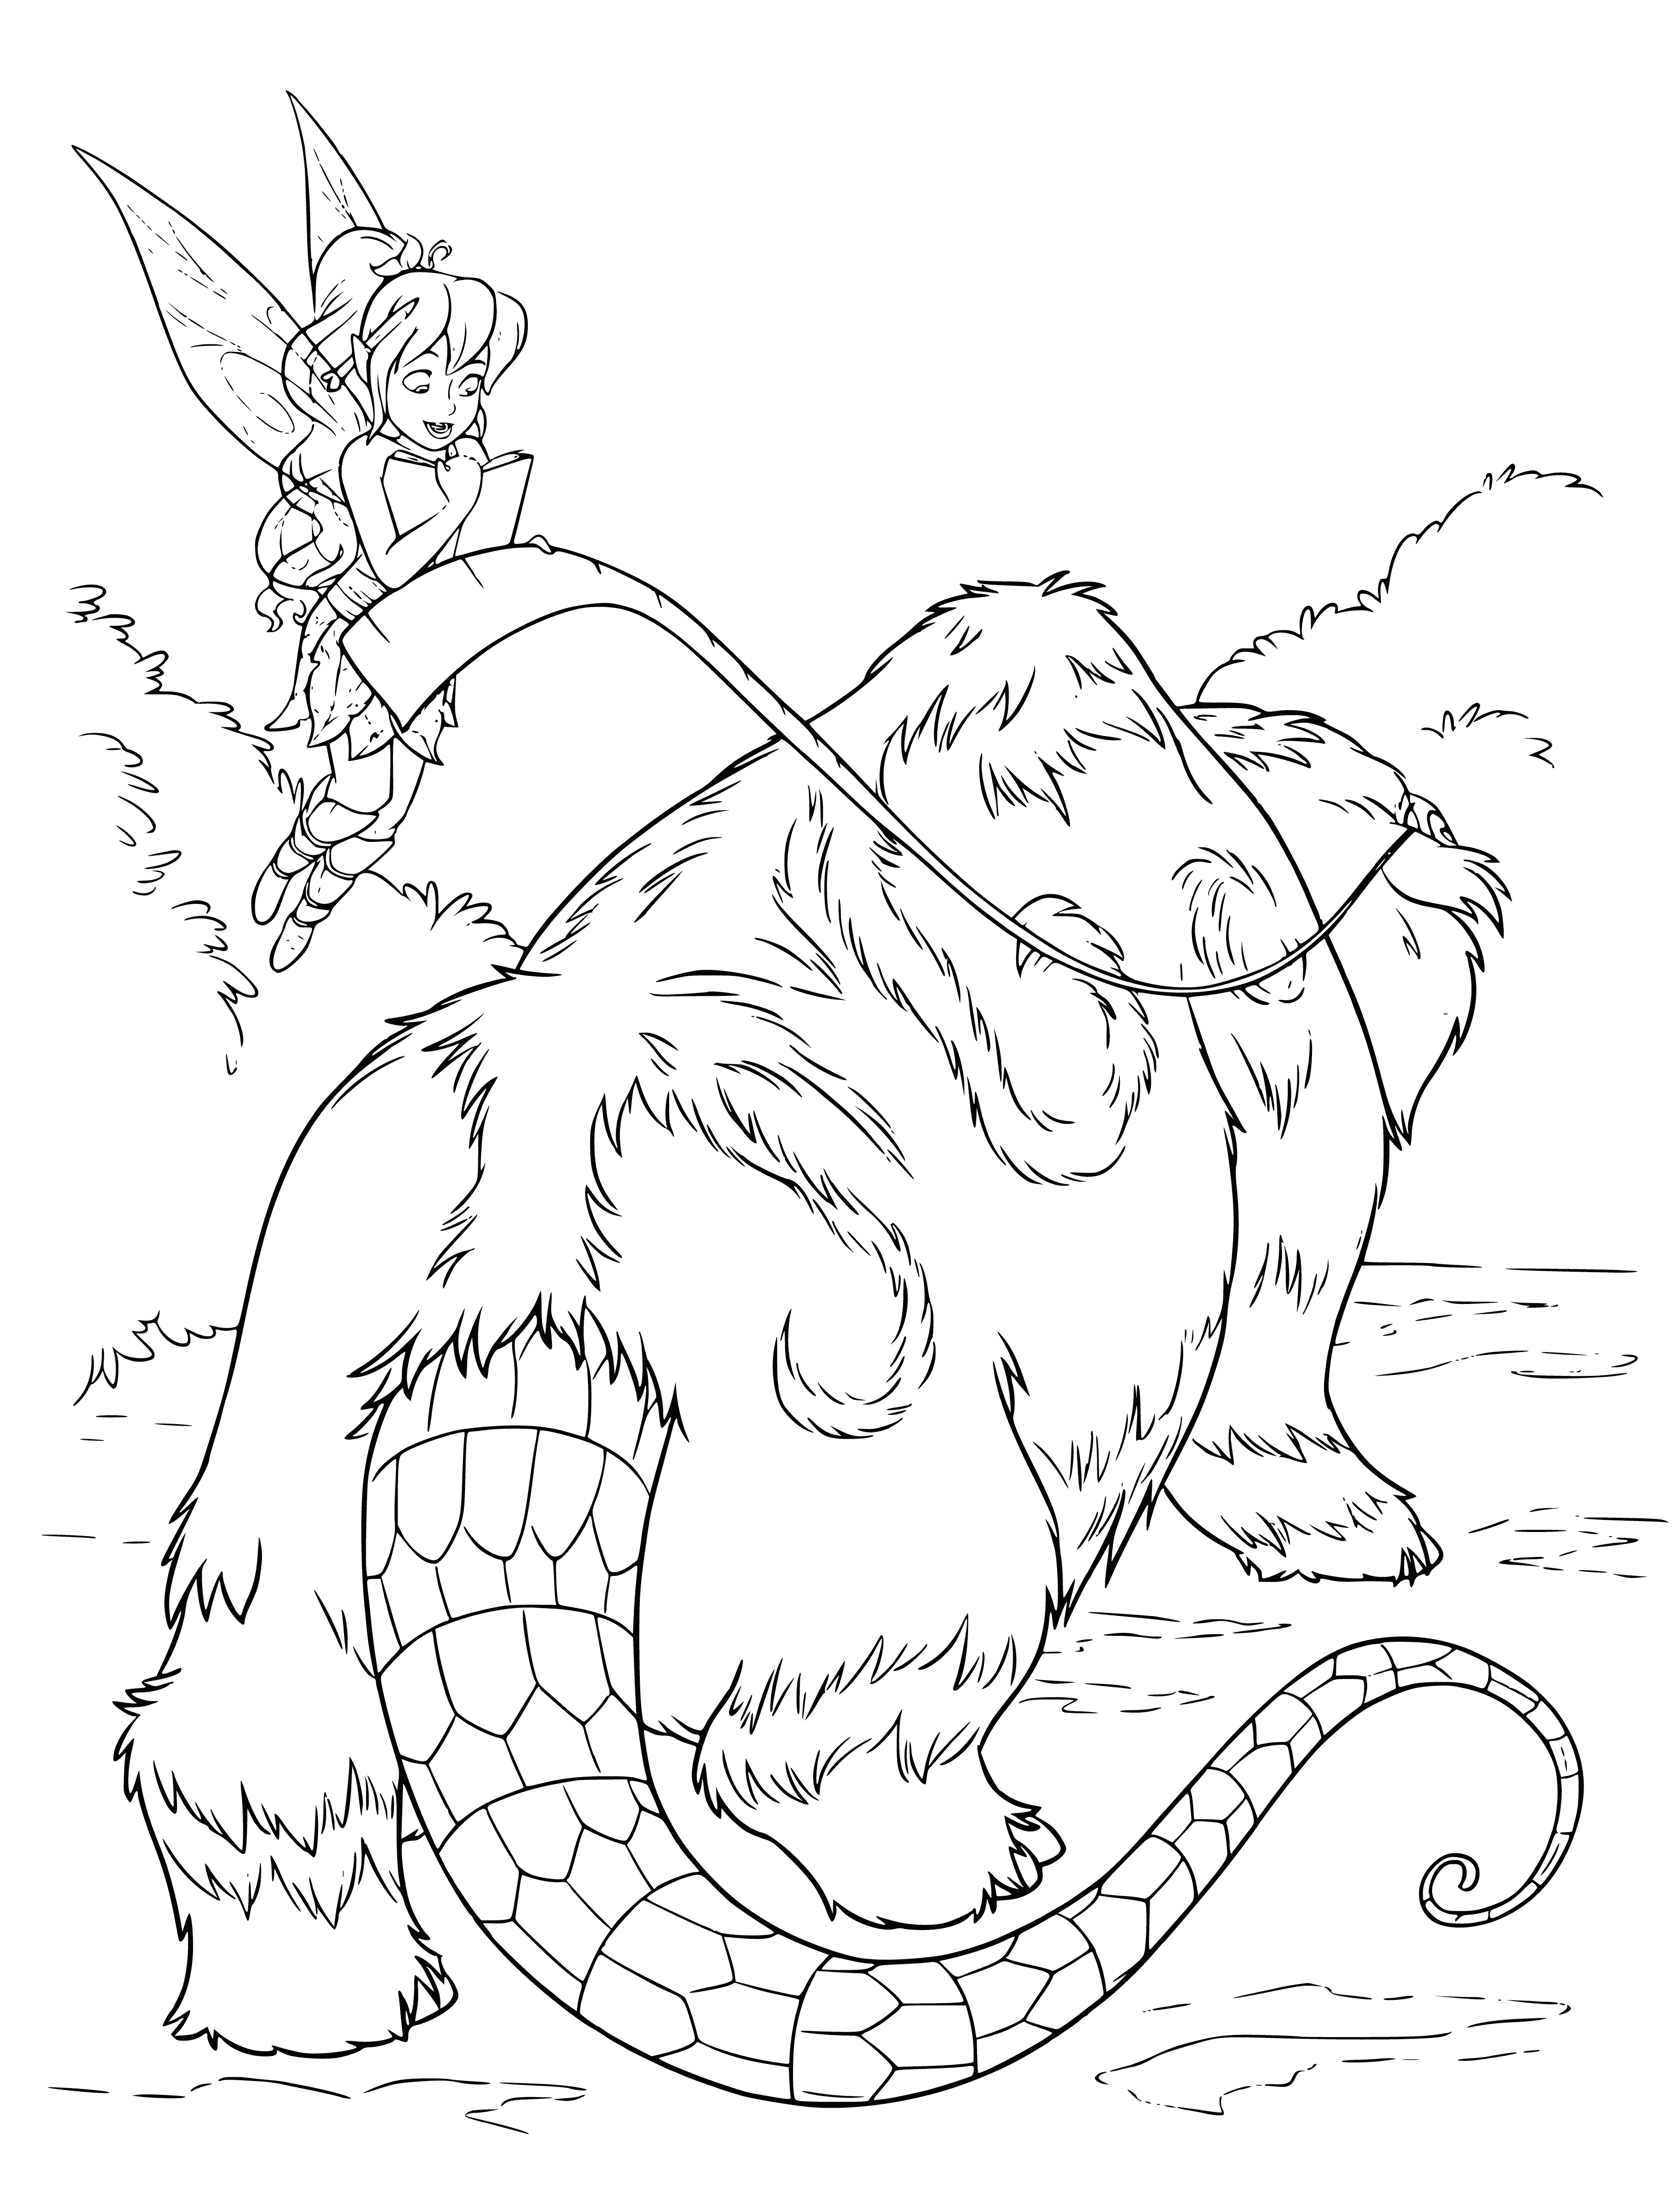 coloring page: Fauna worries as the Beast roars, eyes fiery. Its long claws and big teeth make it dangerous.